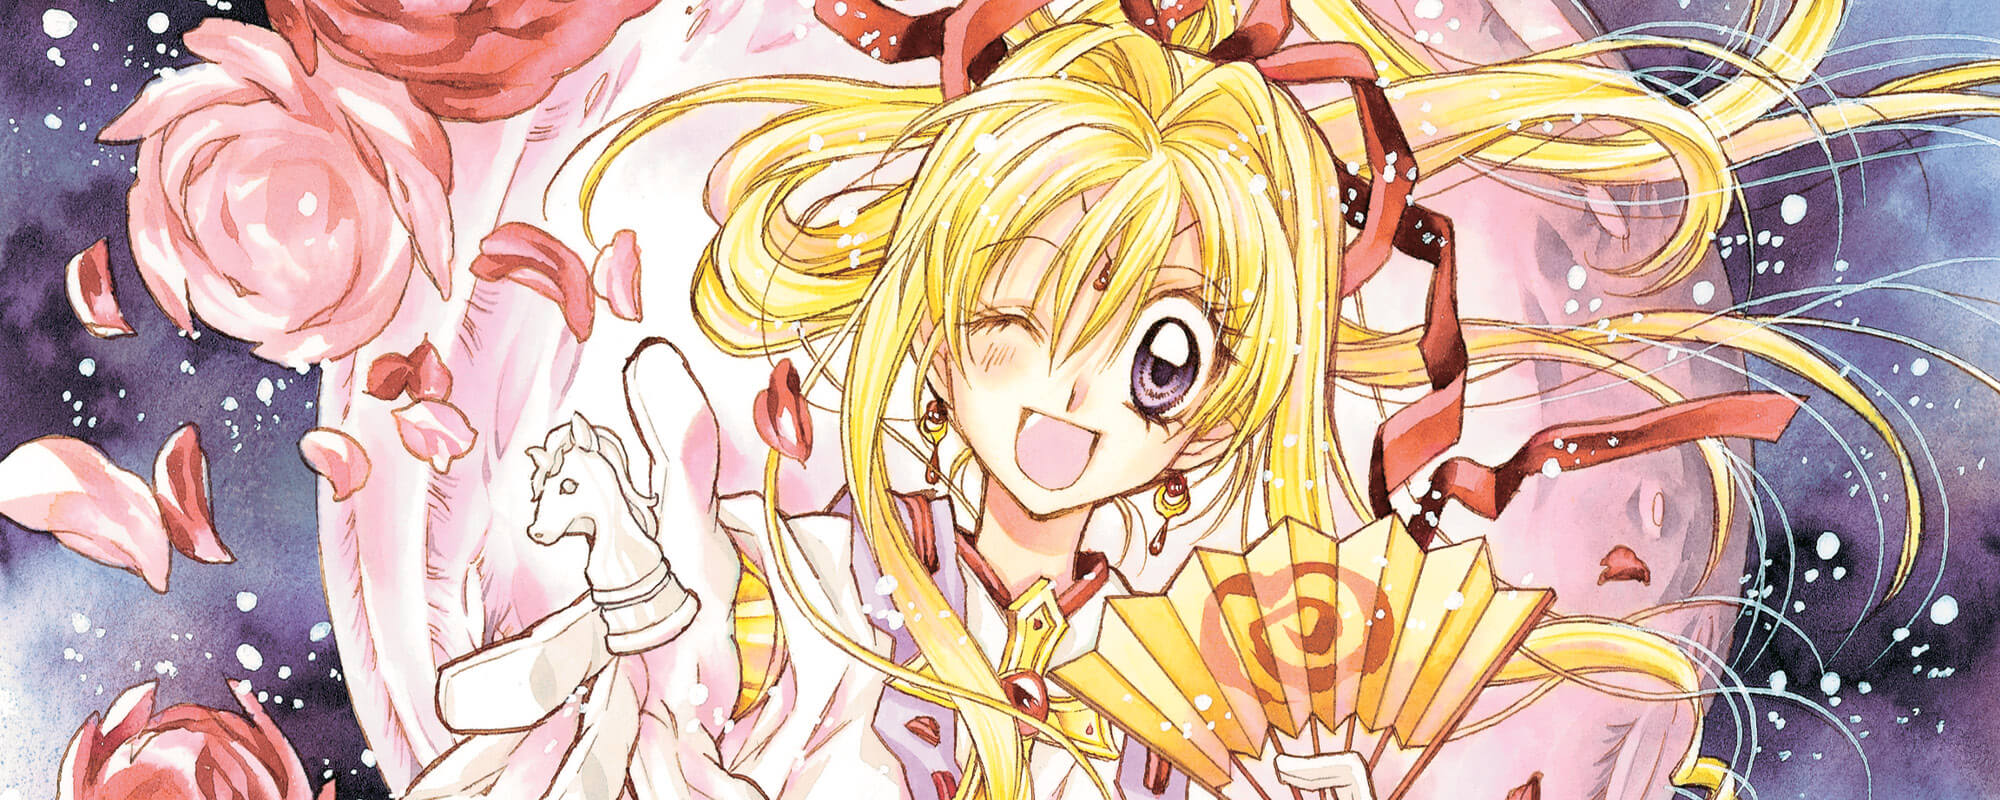 A blond girl winks, reaching out with a white knight chess piece in one hand and a fan in the other. Roses surround her and what appears to be a large moon is behind her